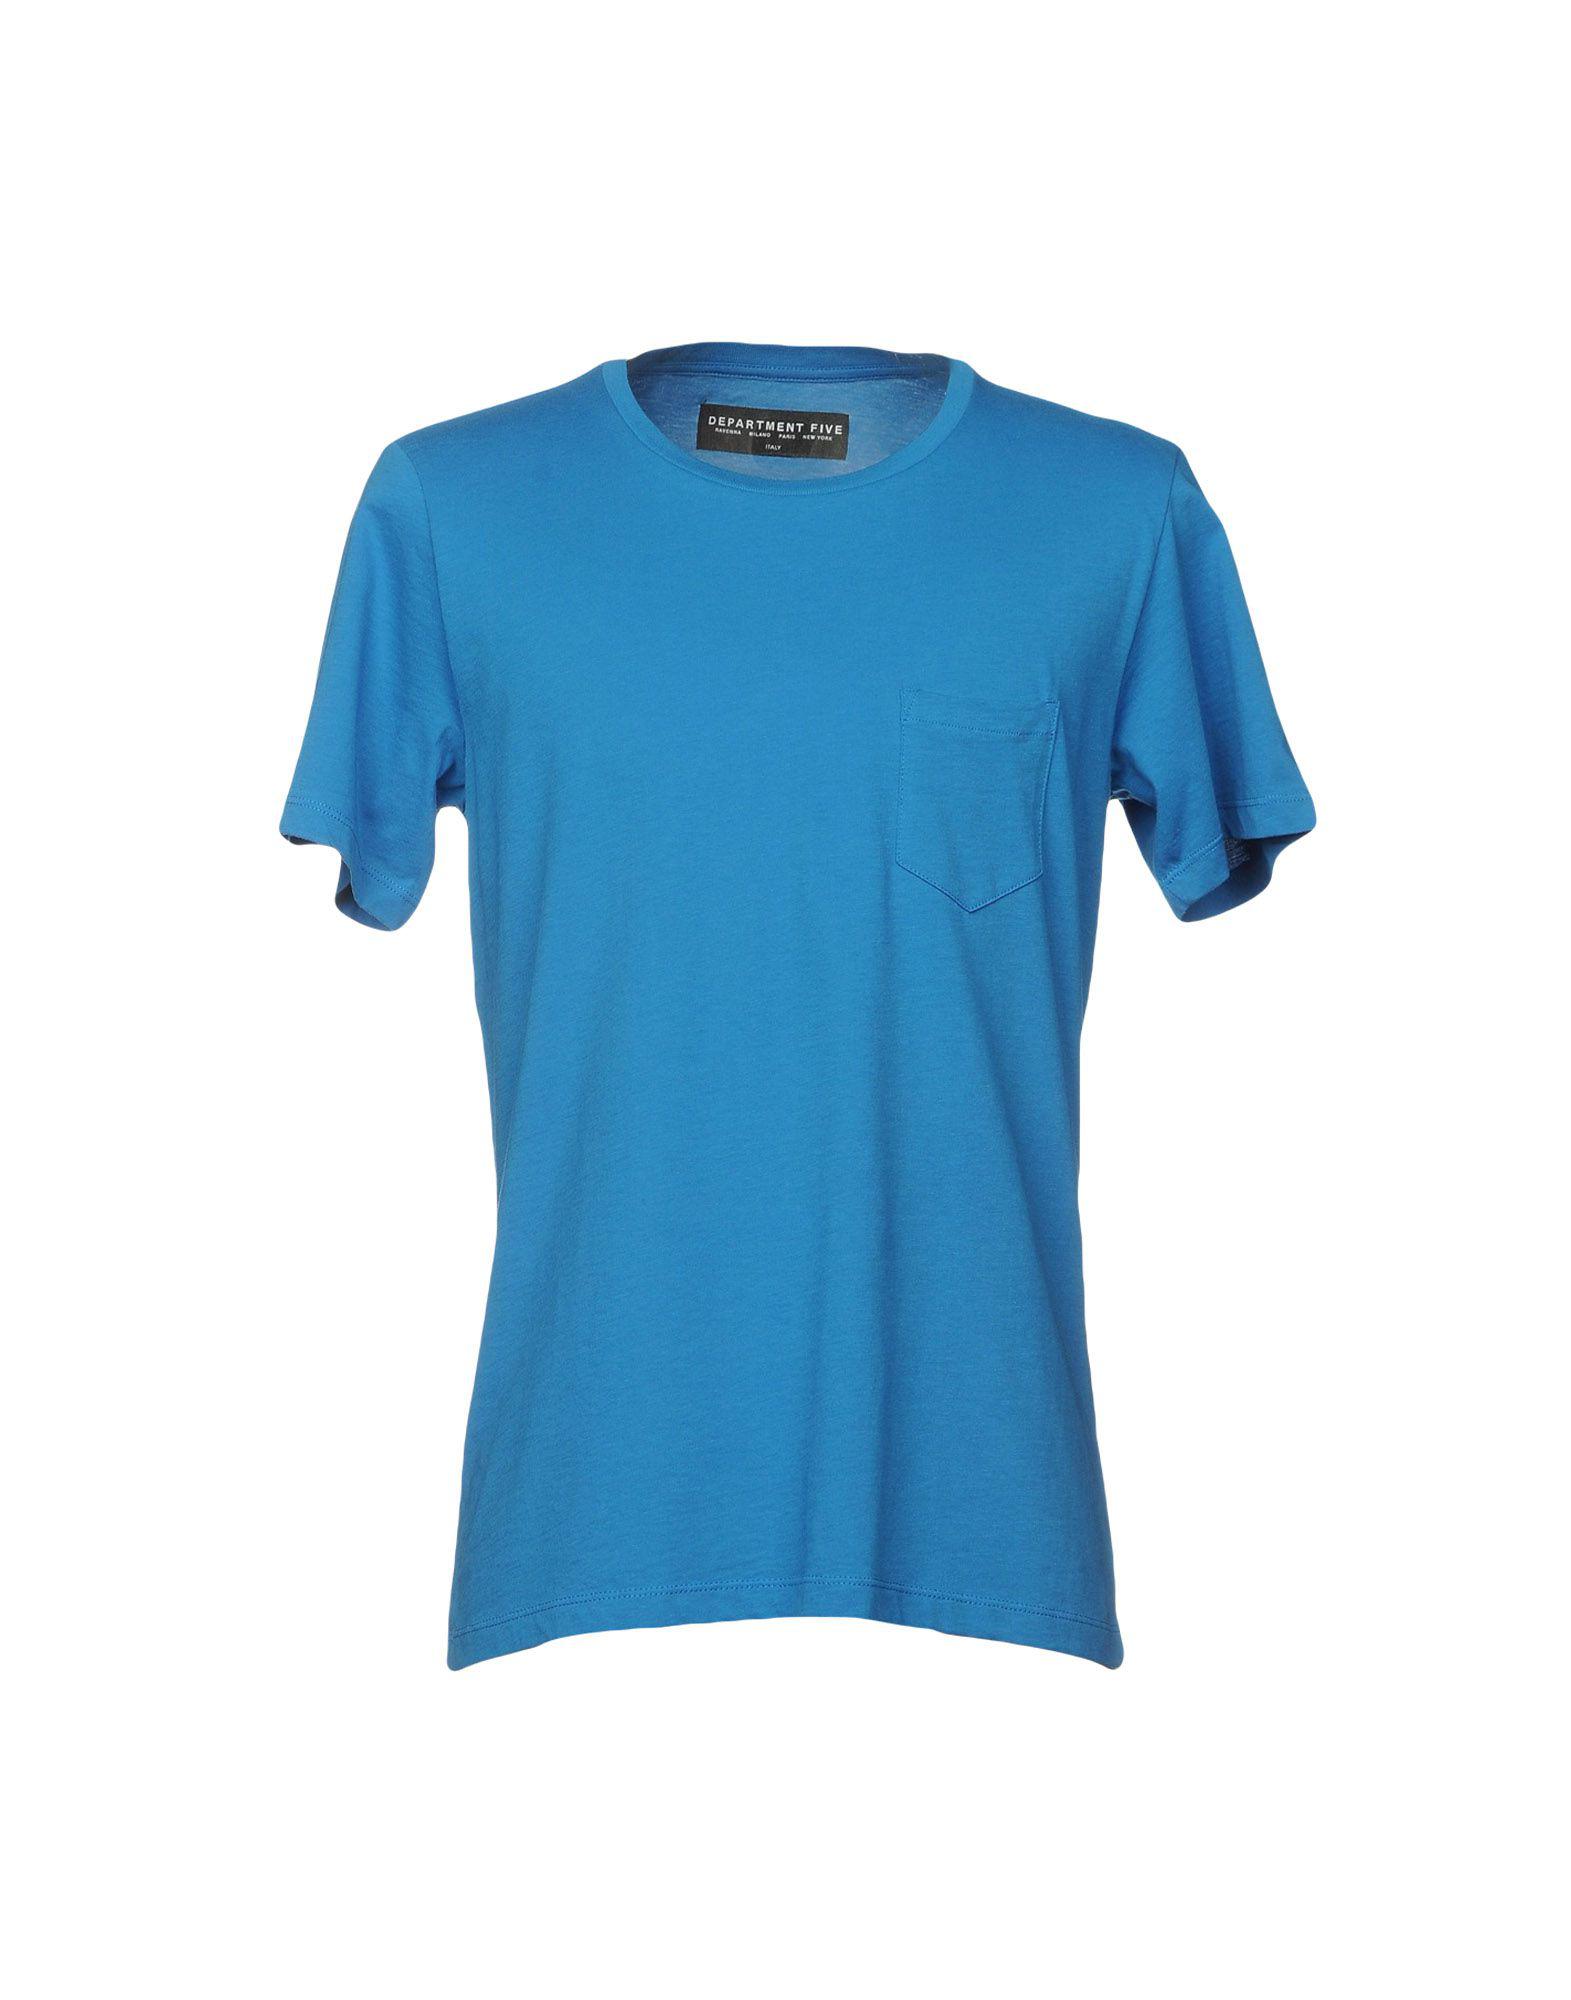 Lyst - Department 5 T-shirt in Blue for Men